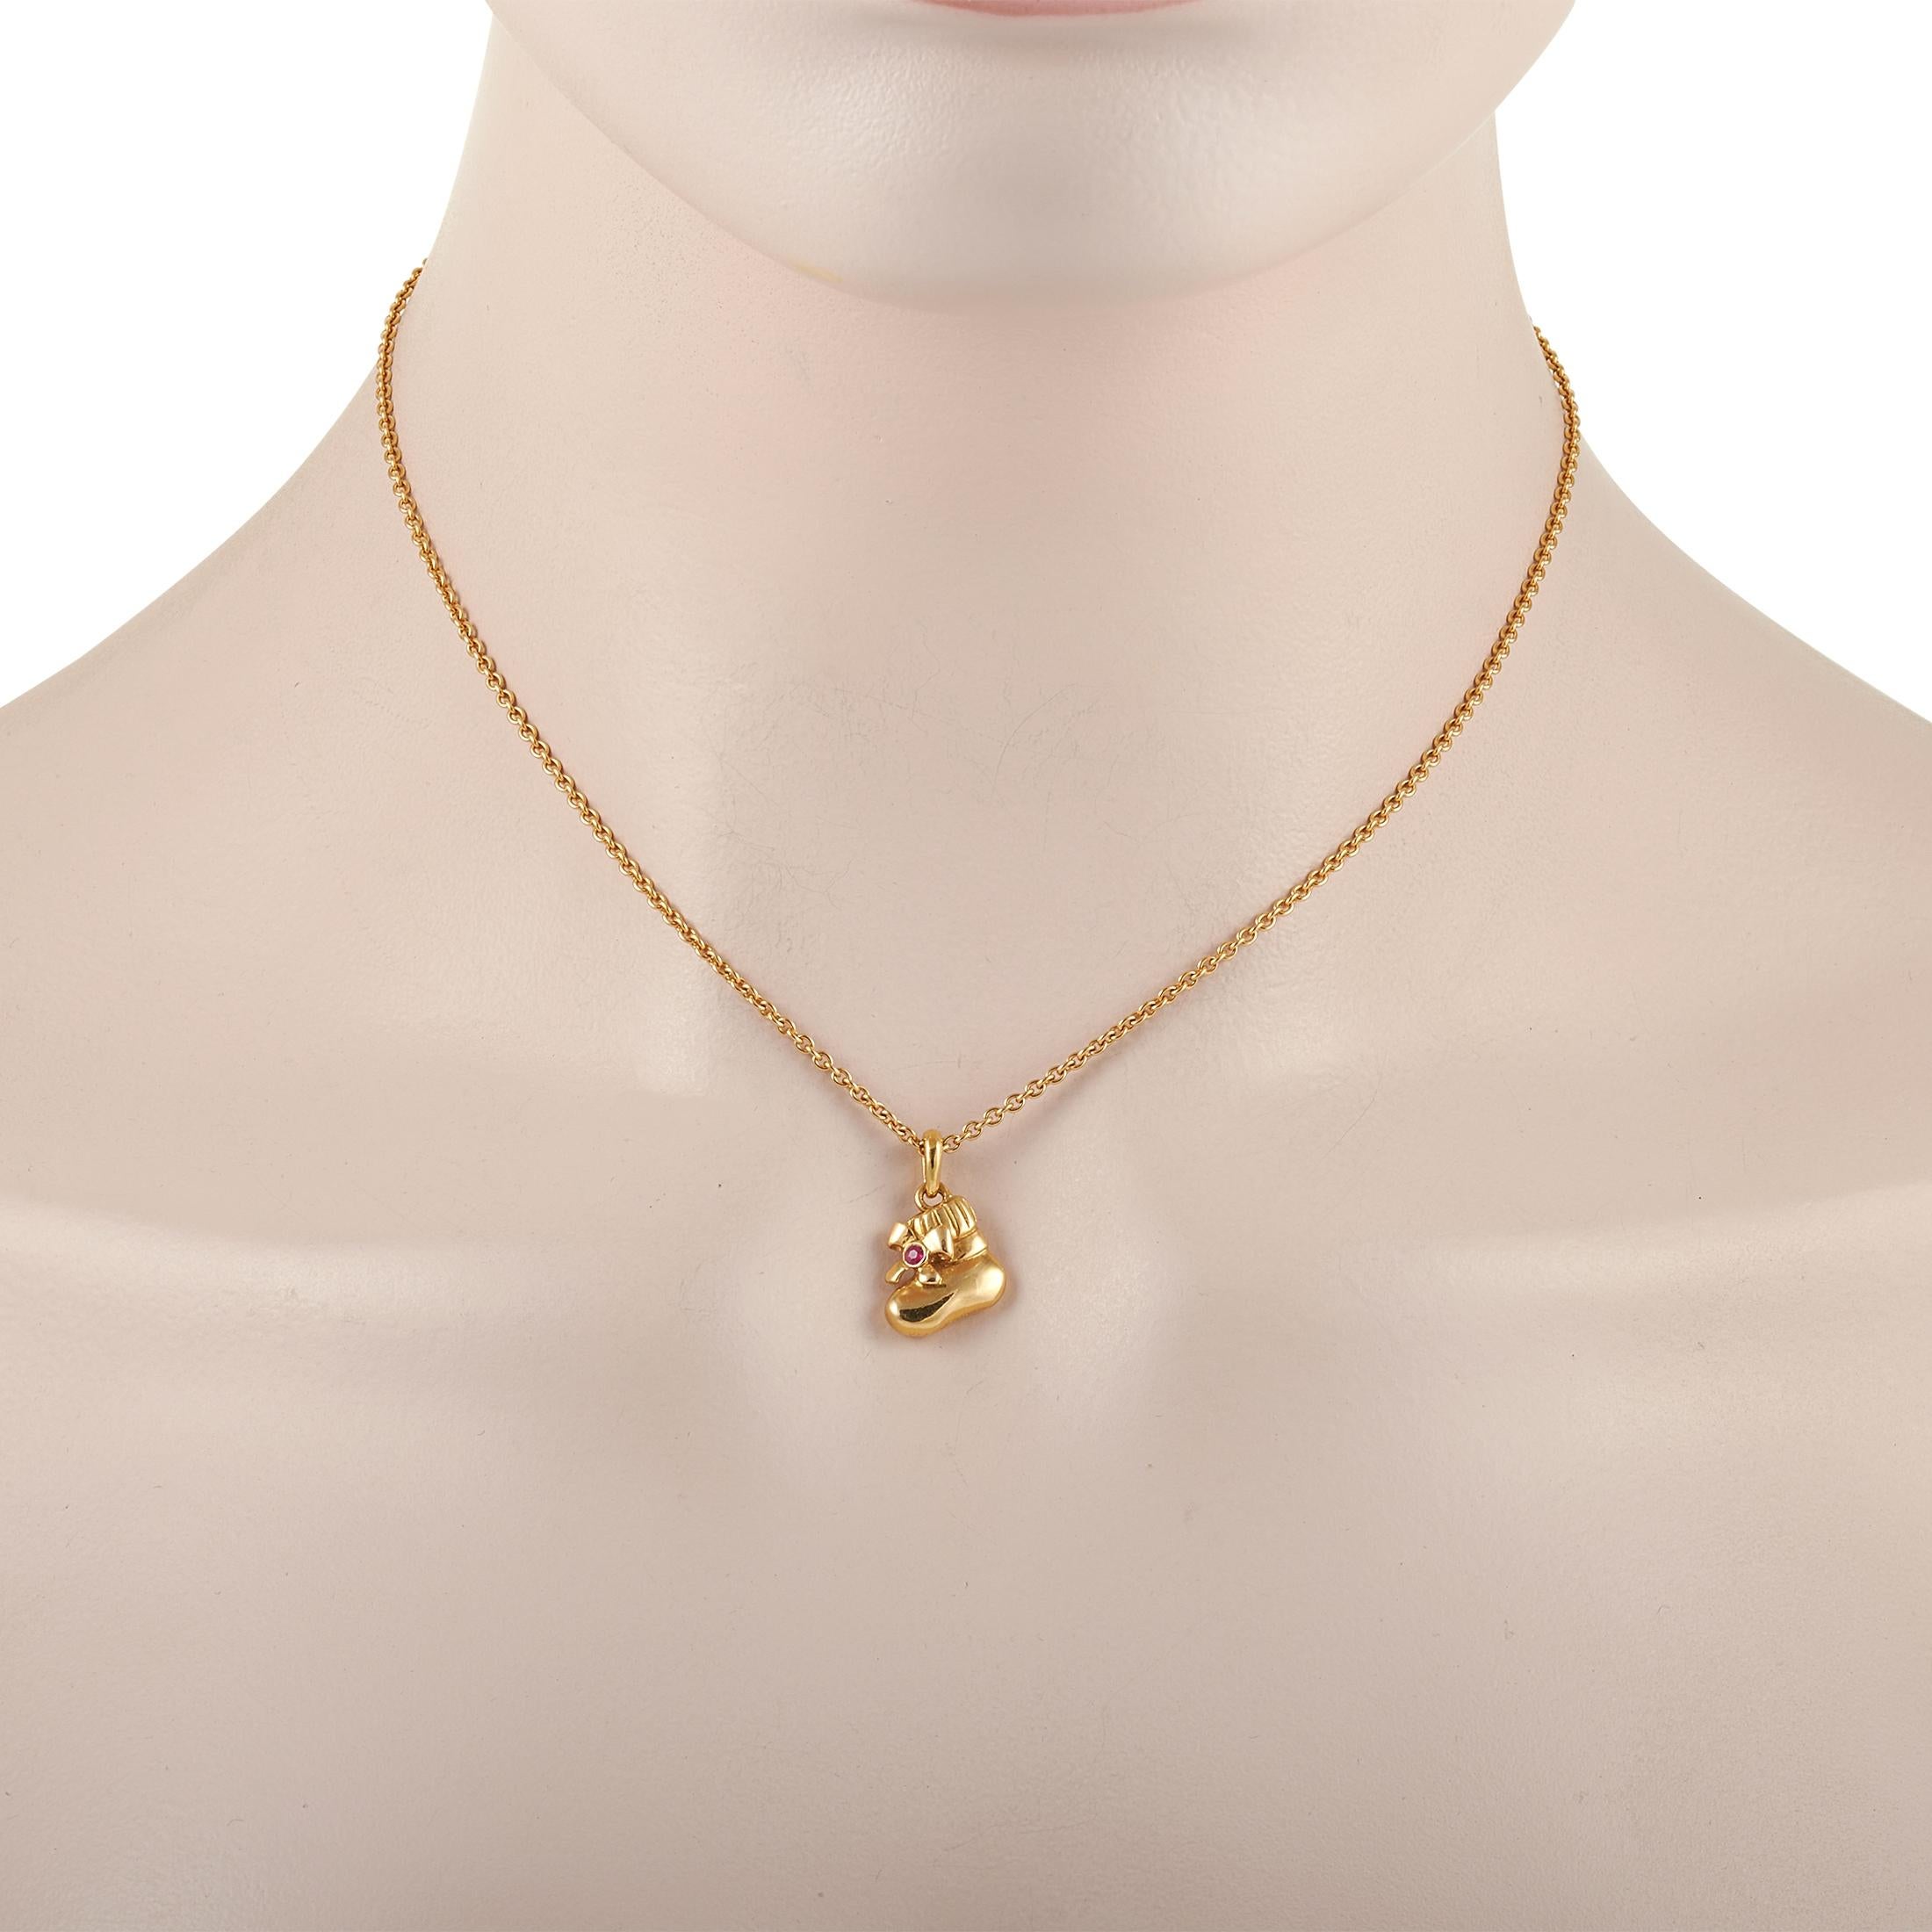 This sweet Van Cleef & Arpels 18K Yellow Gold Ruby Shoe Pendant Necklace is crafted from 18K yellow gold chain and features a yellow gold shoe pendant that is set with a round ruby. The dainty chain measures 15 inches in length and features a spring